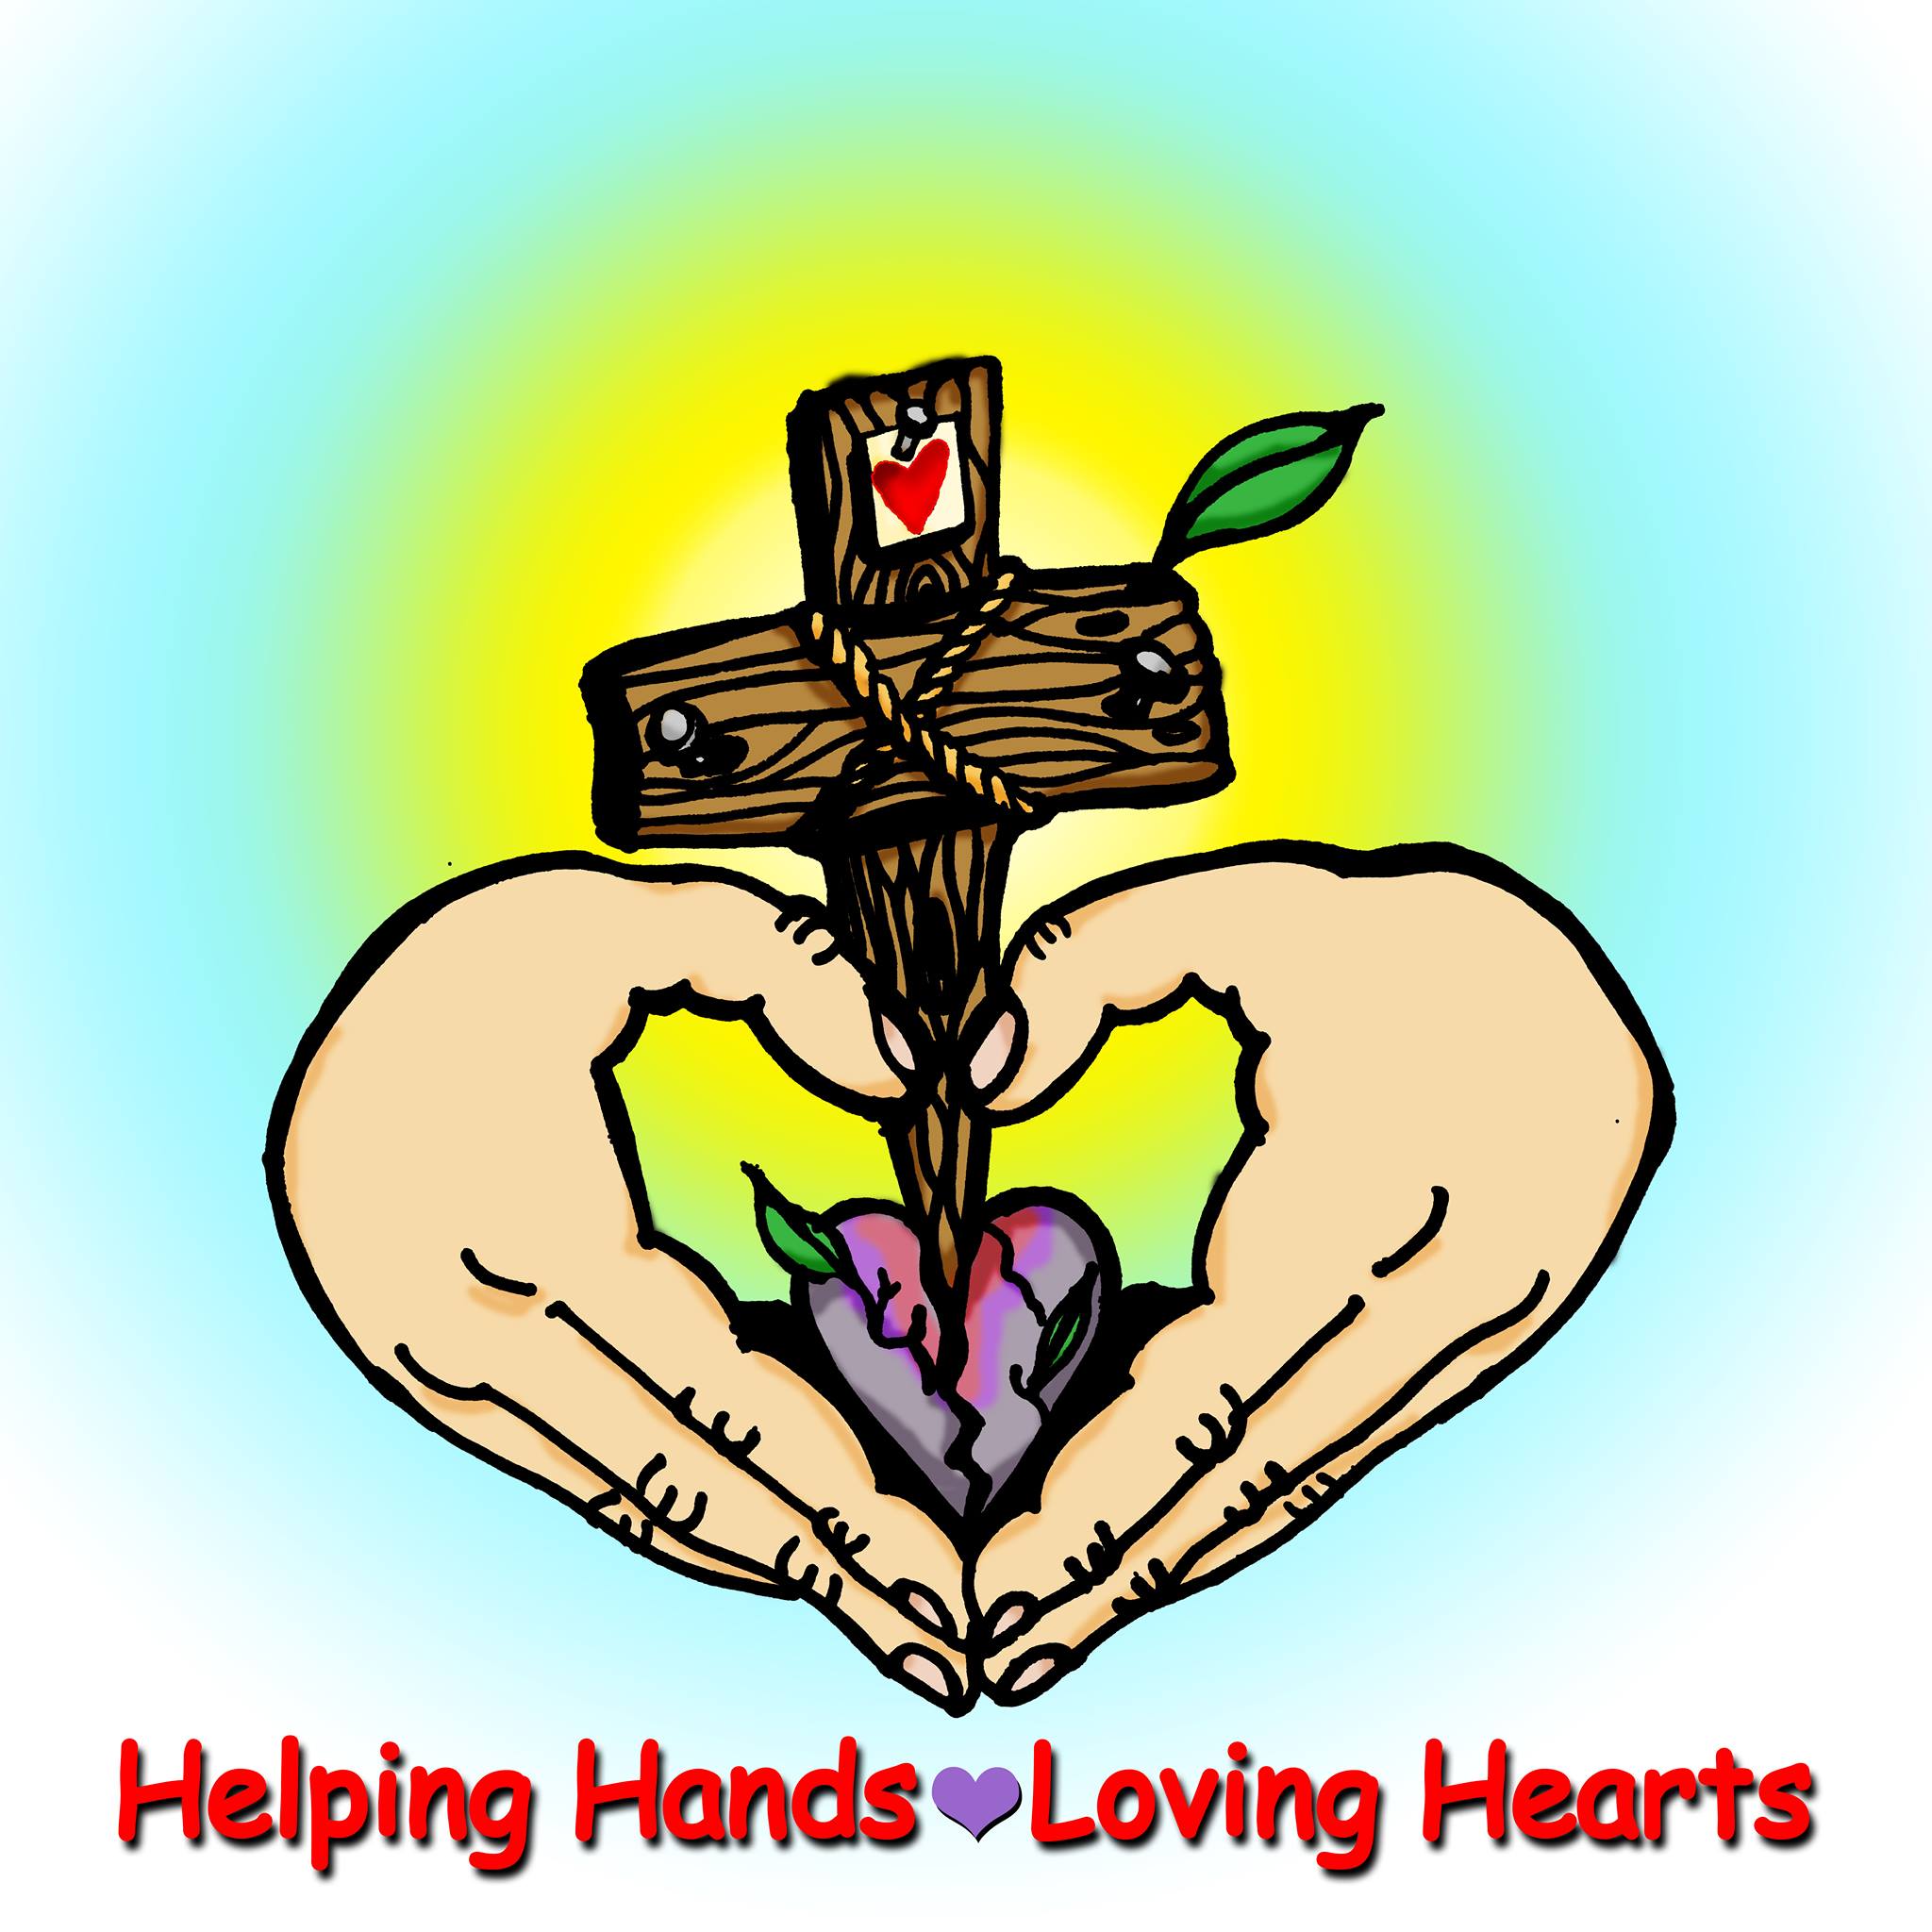 Helping Hands/Loving Hearts